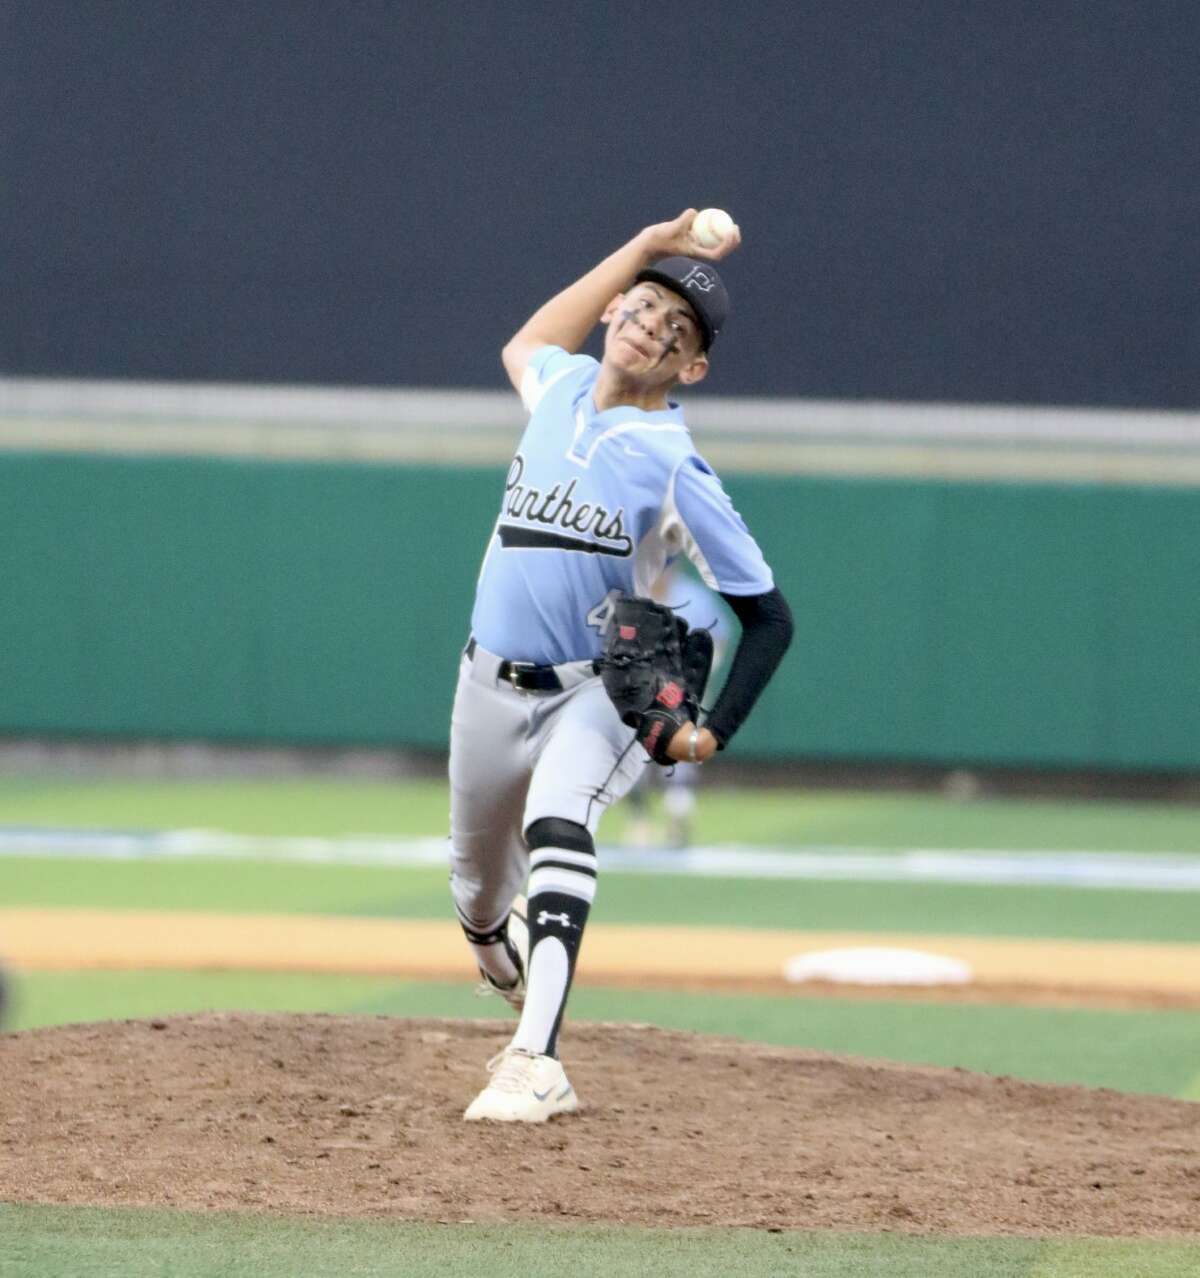 United South's Arturo Garcia pitched a one-hitter Wednesday, April 19 allowing two unearned runs with 13 strikeouts and no outs in a 3-2 win over LBJ at Uni-Trade Stadium.